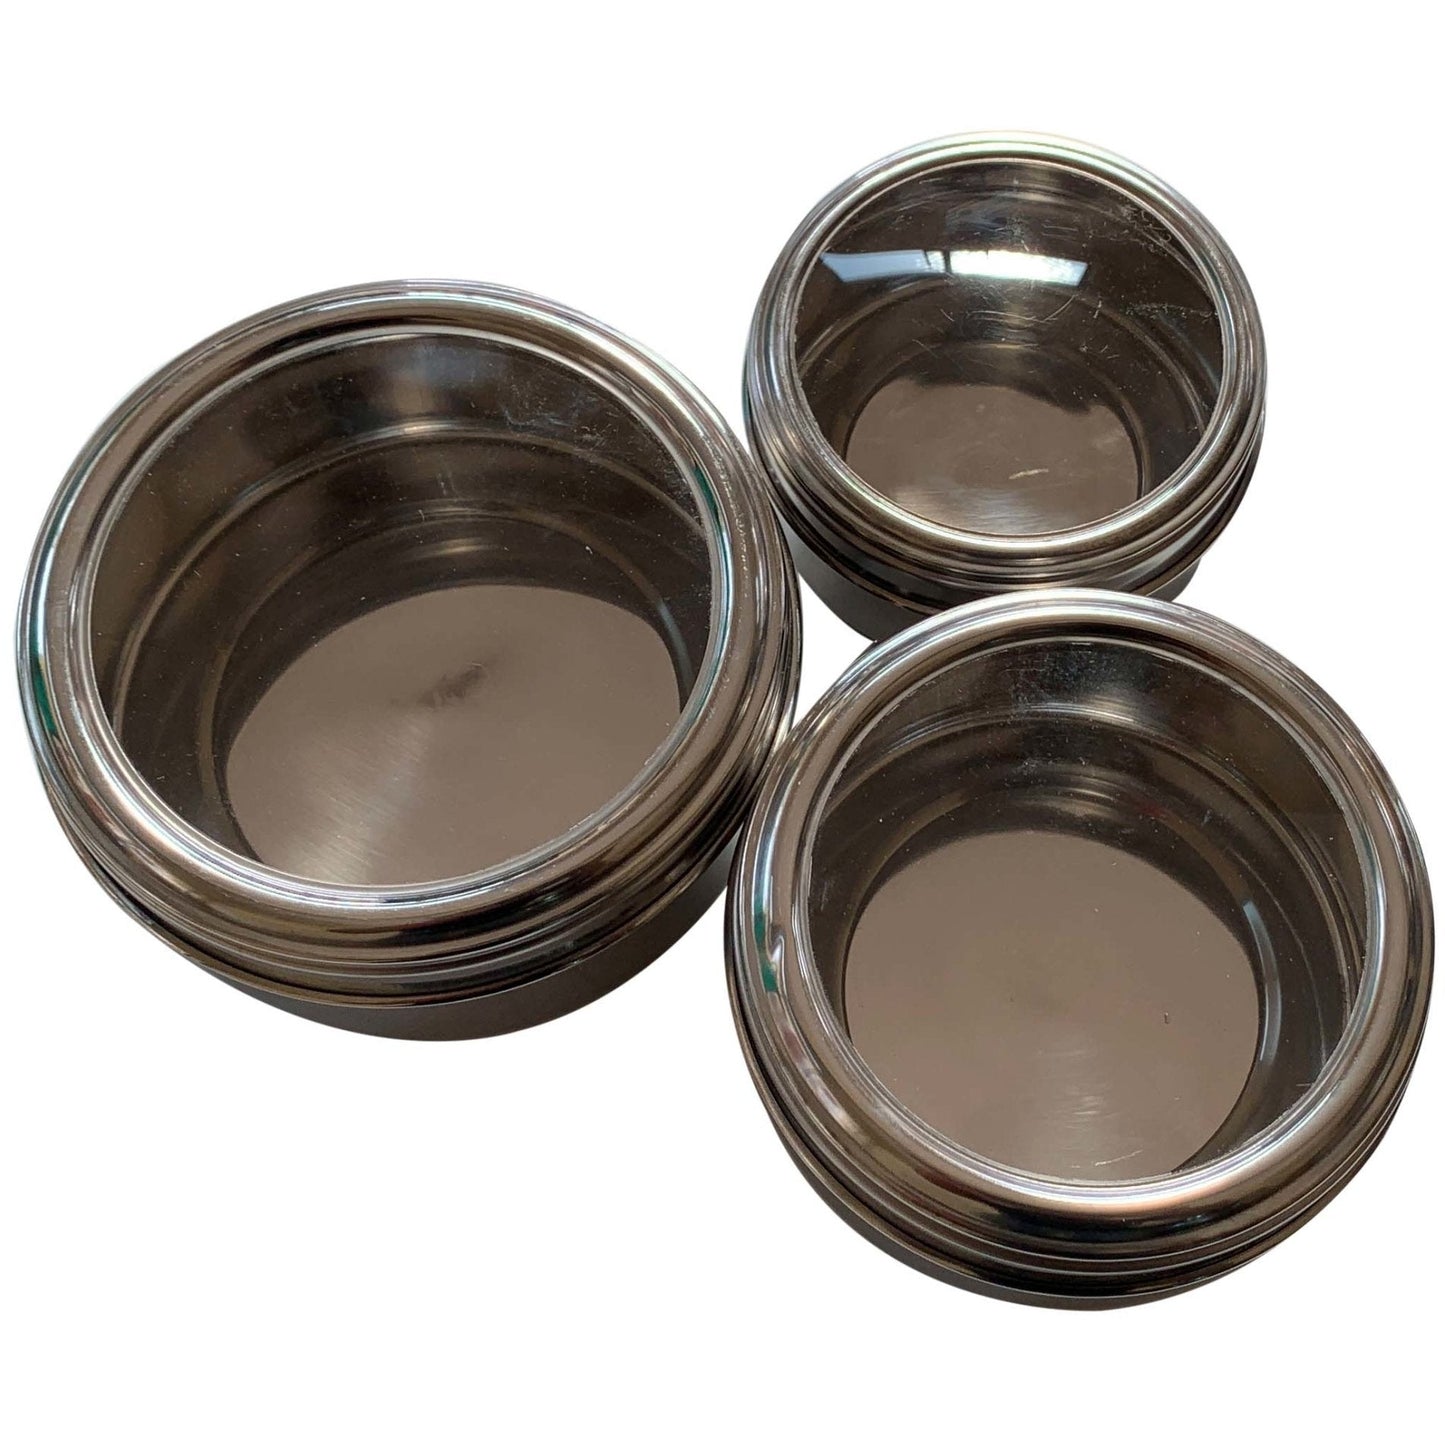 3 Piece Stainless Steel Canisters Set - U-88010 - ToolUSA